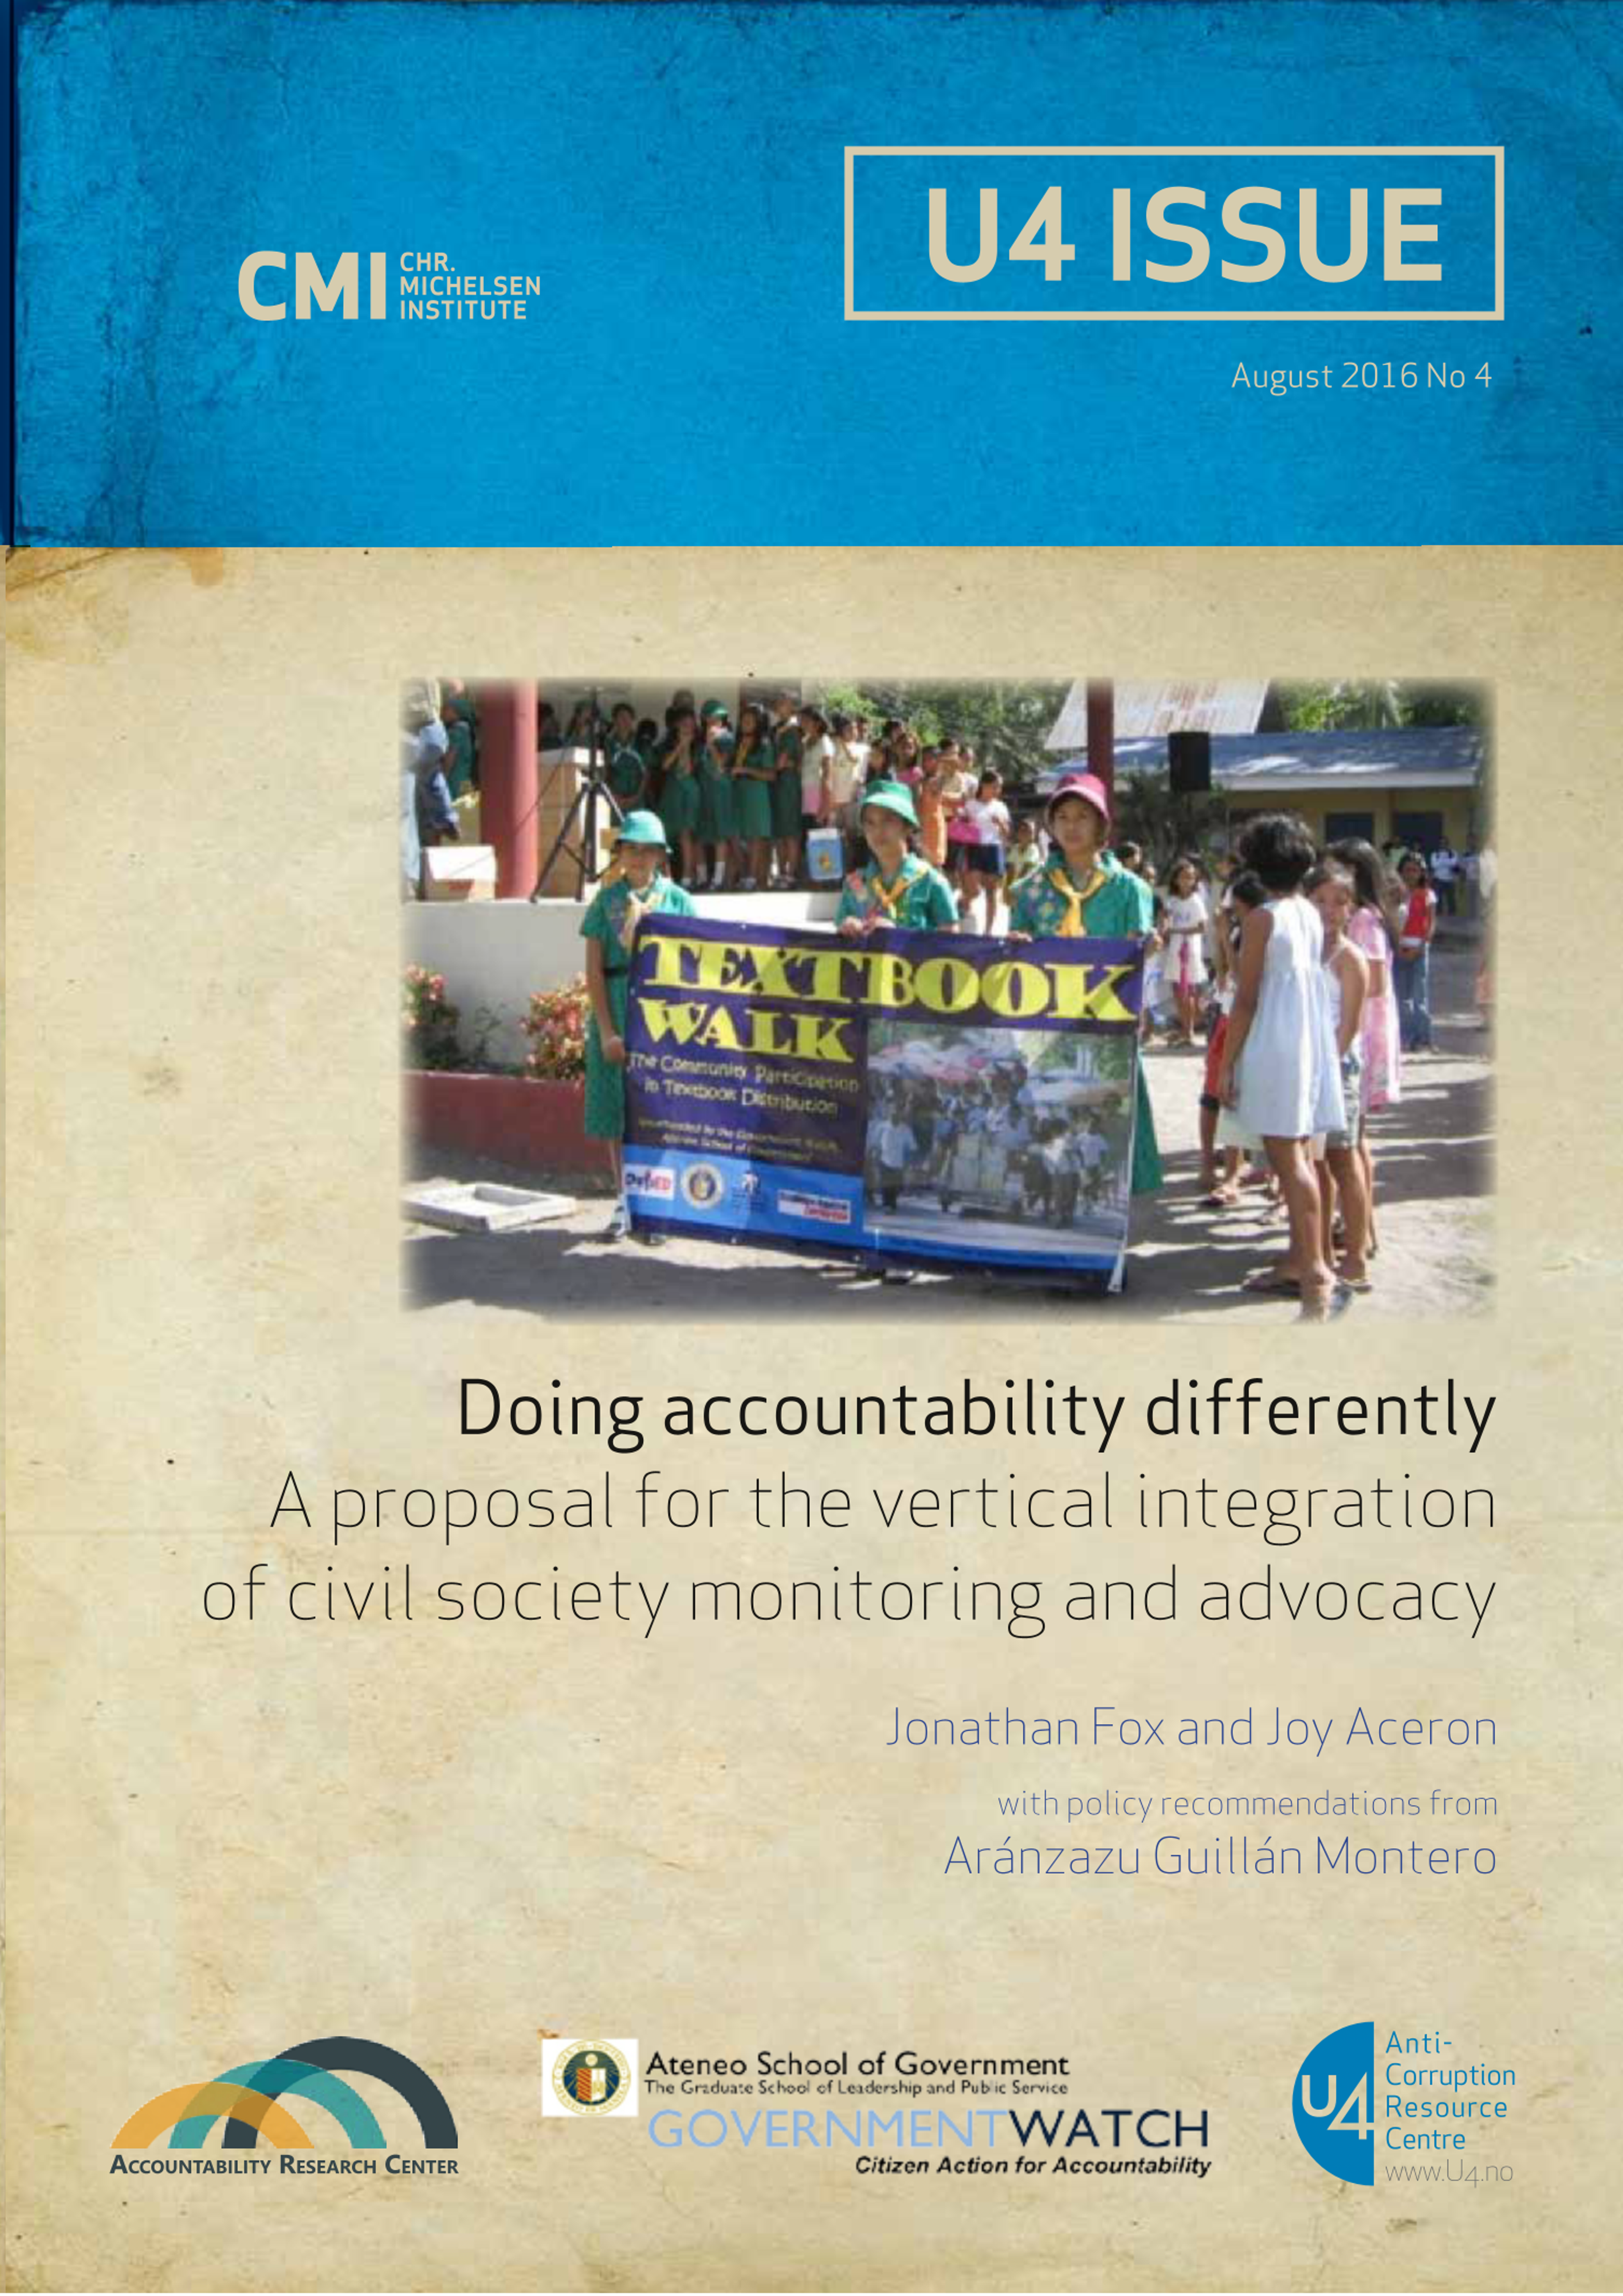 Doing accountability differently. A proposal for the vertical integration of civil society monitoring and advocacy.